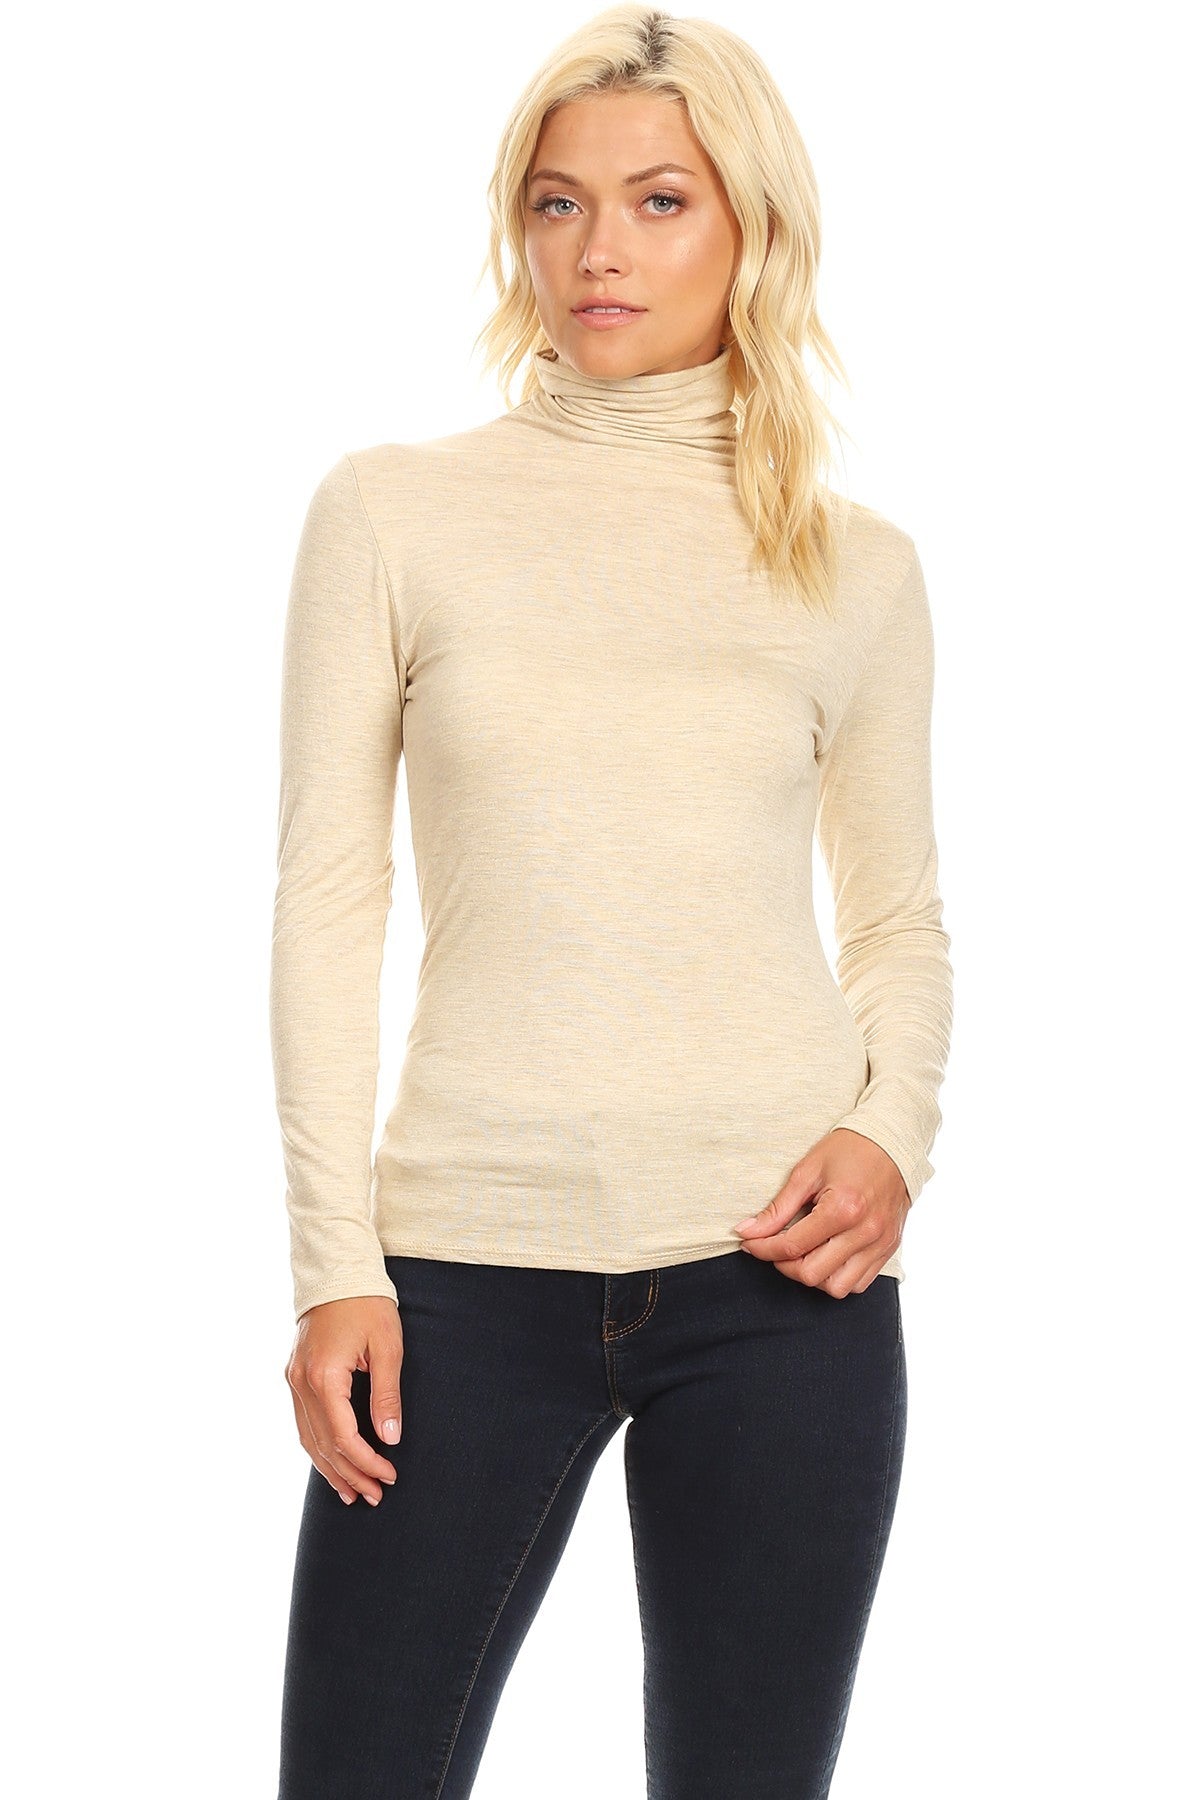 Womens Long Sleeve Fitted Turtle Neck